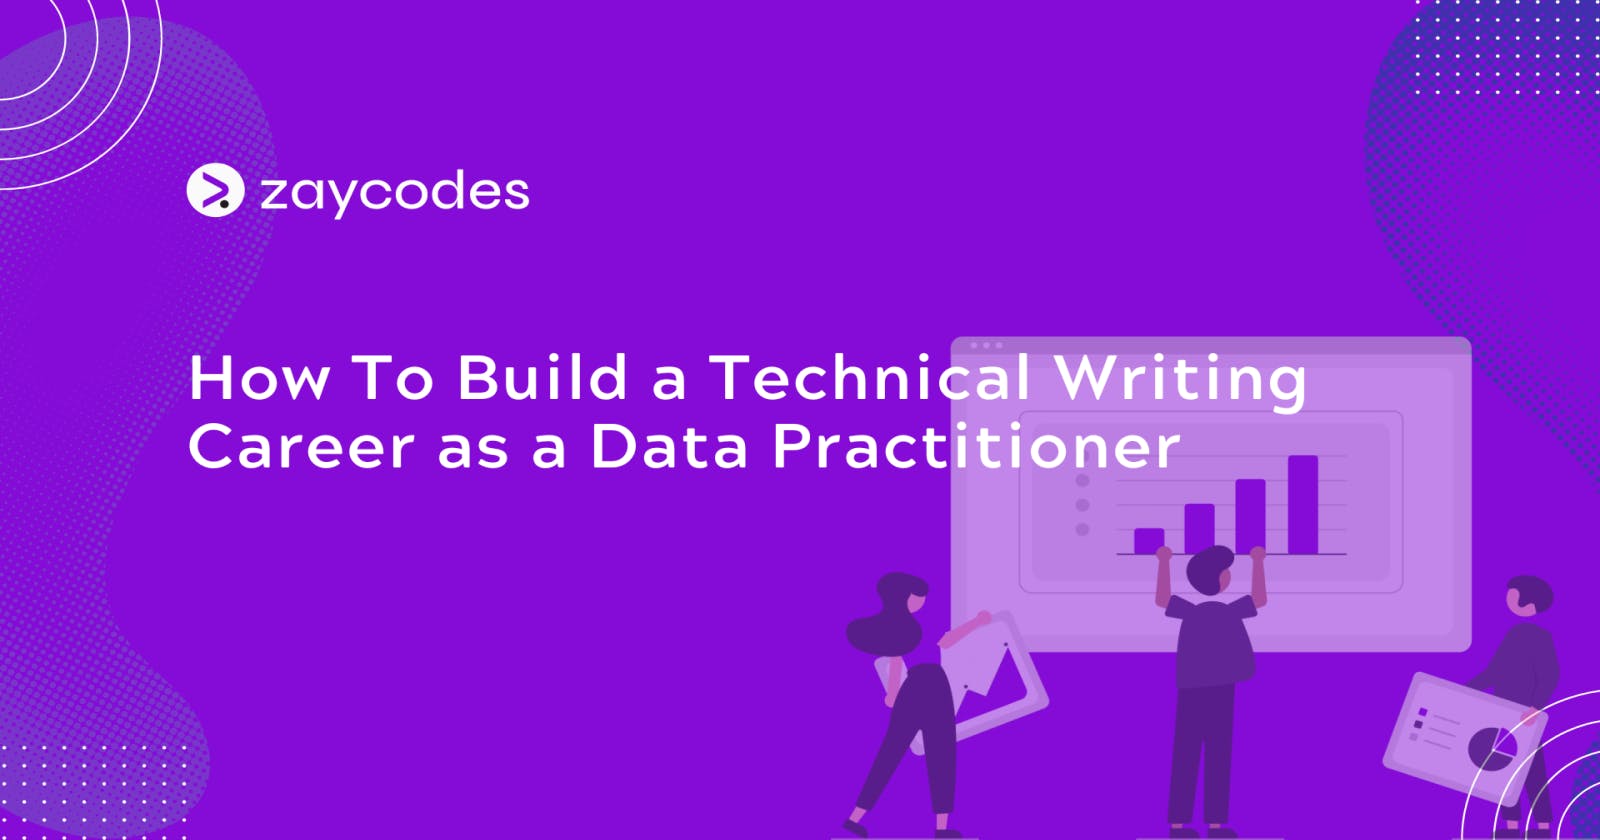 How To Build a Technical Writing Career as a Data Practitioner